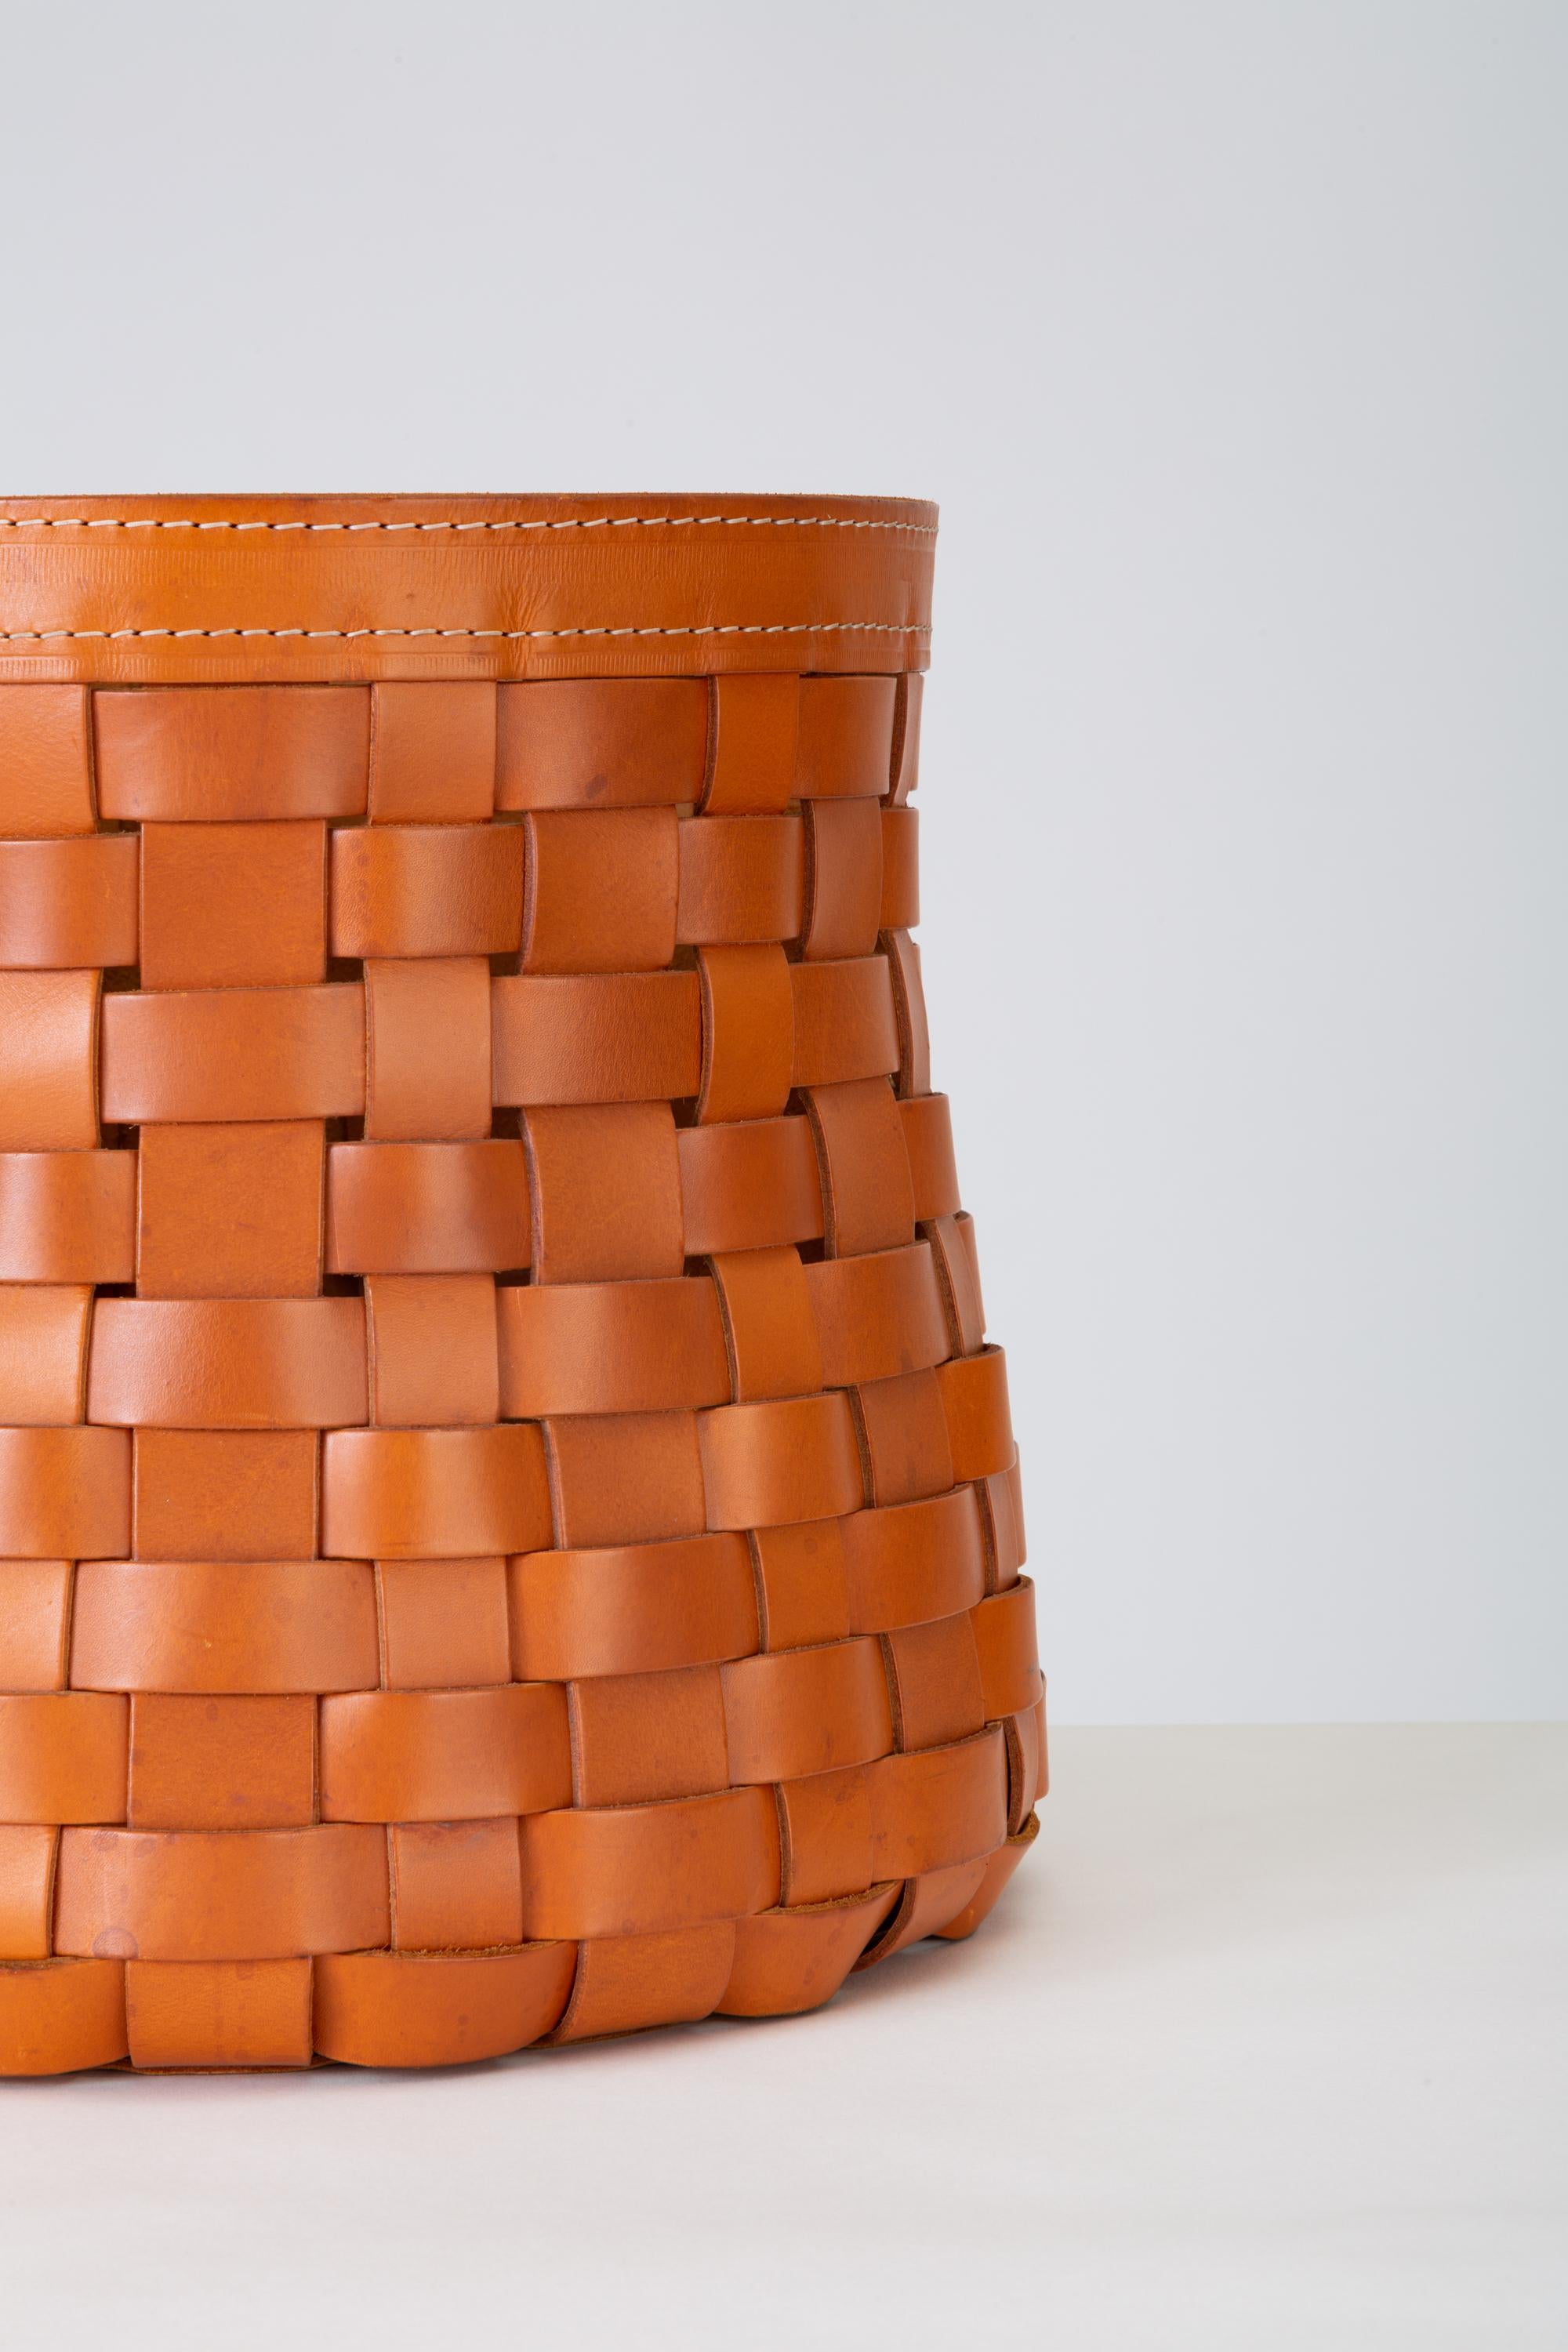 Late 20th Century “Intrecci” Round Basket in Woven Leather by Arte Cuoio & Triangolo